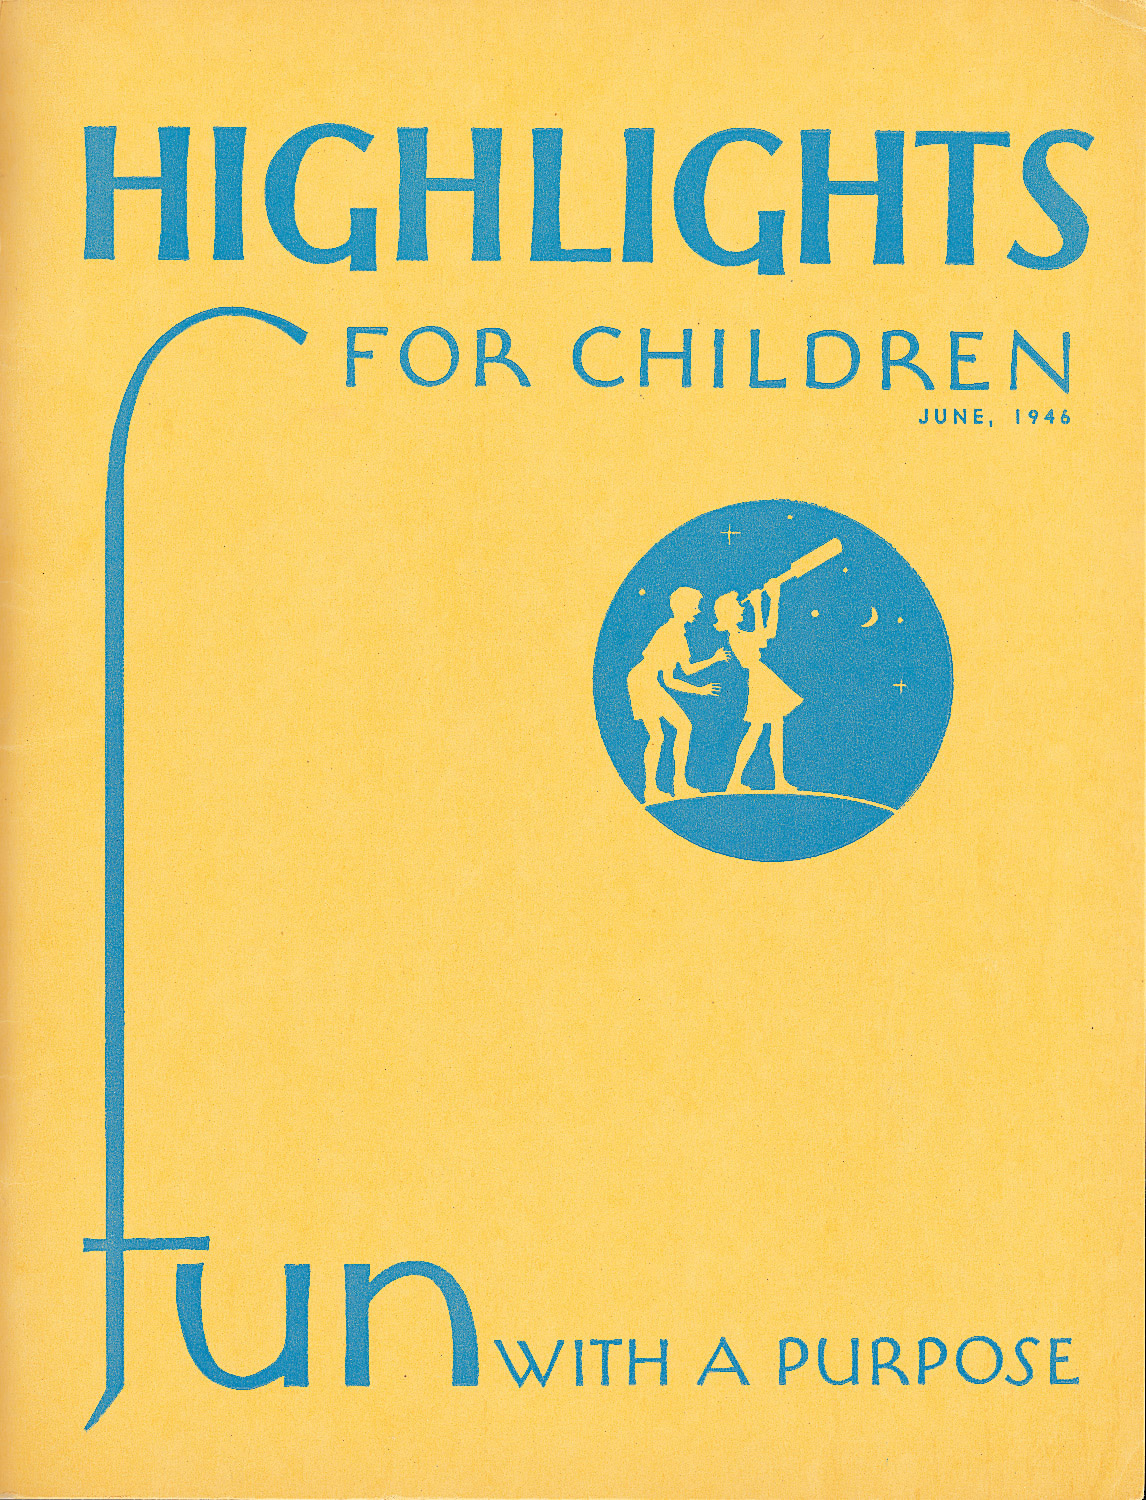 Highlights for Children Inaugural Cover